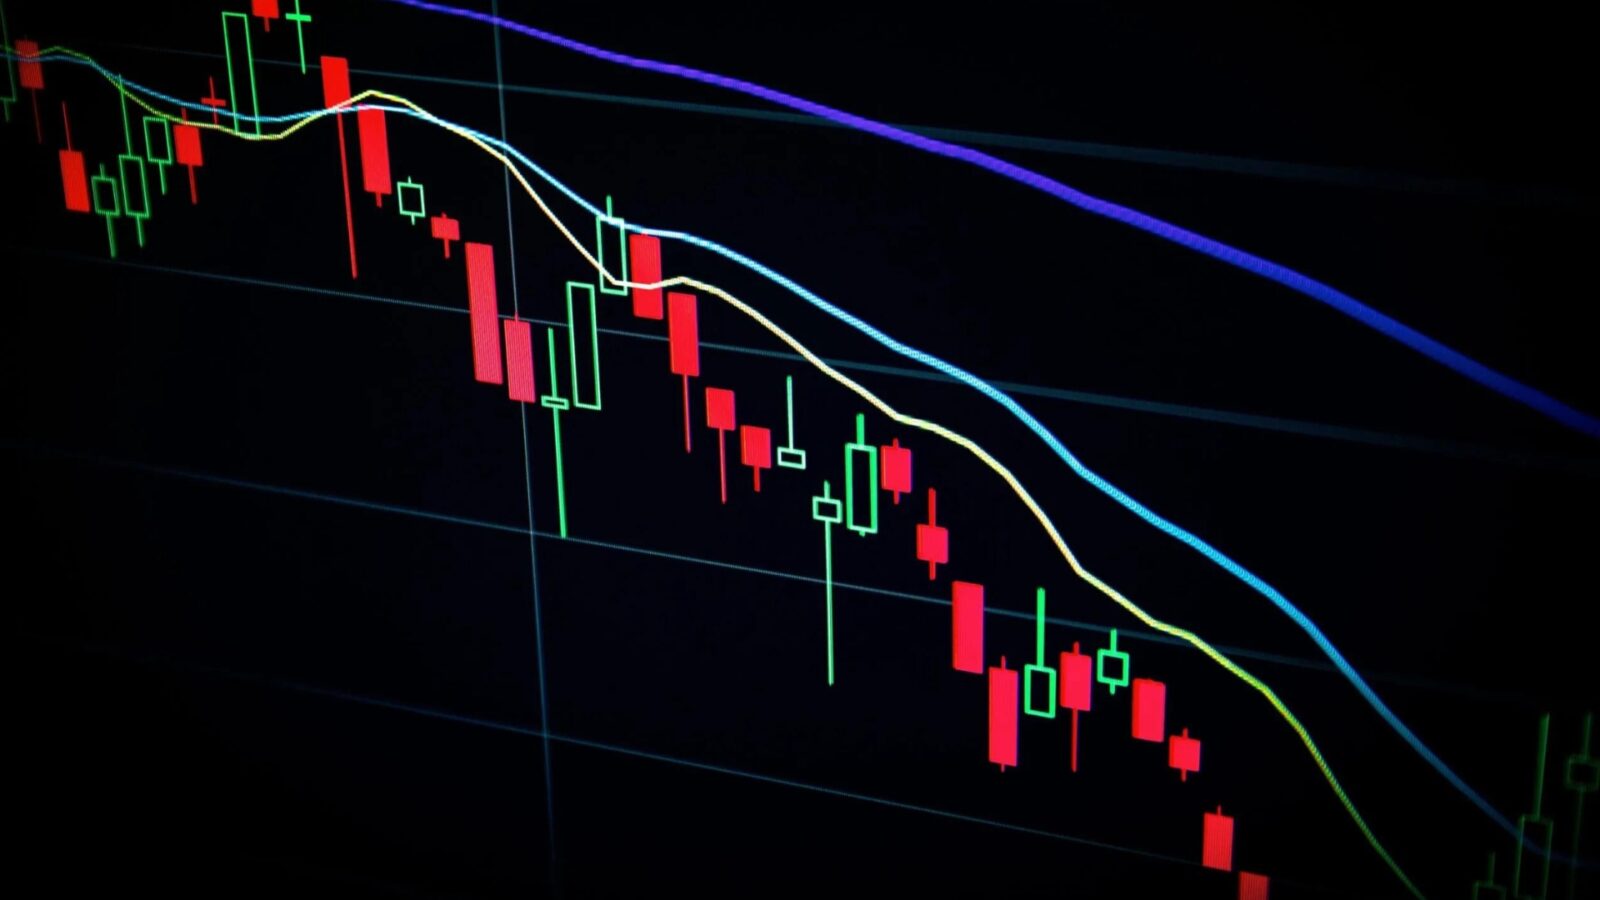 Causes of the Crypto Market Downturn The recent downturn in the cryptocurrency market has left many traders anxious and questioning the reasons behind the decline. Multiple factors contribute to the current crypto crisis, shedding light on the challenges faced by the industry.